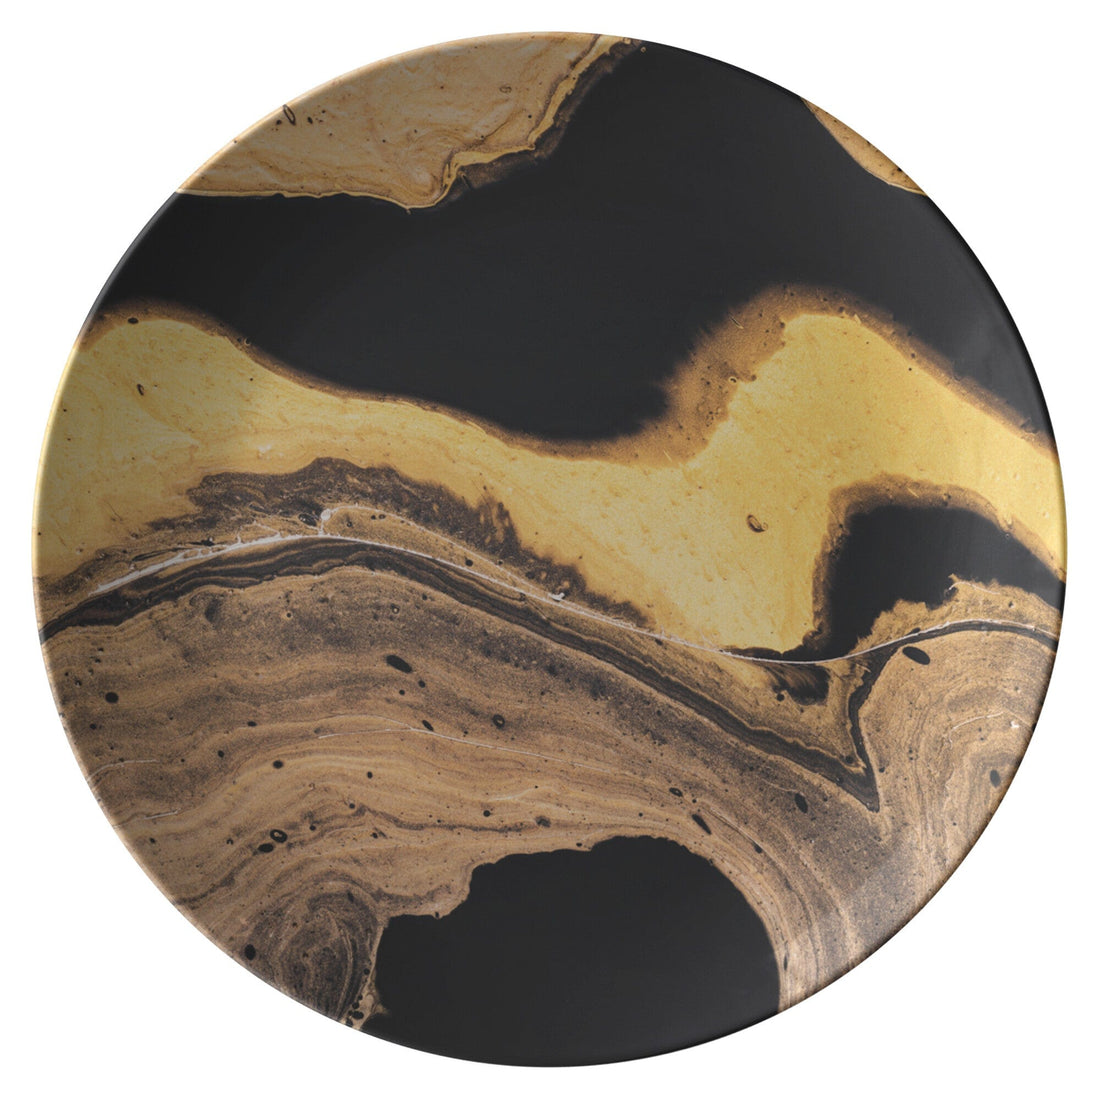 Kate McEnroe New York Dinner Plate in Black and Gold Abstract Liquid Marble PrintPlates9820SINGLE